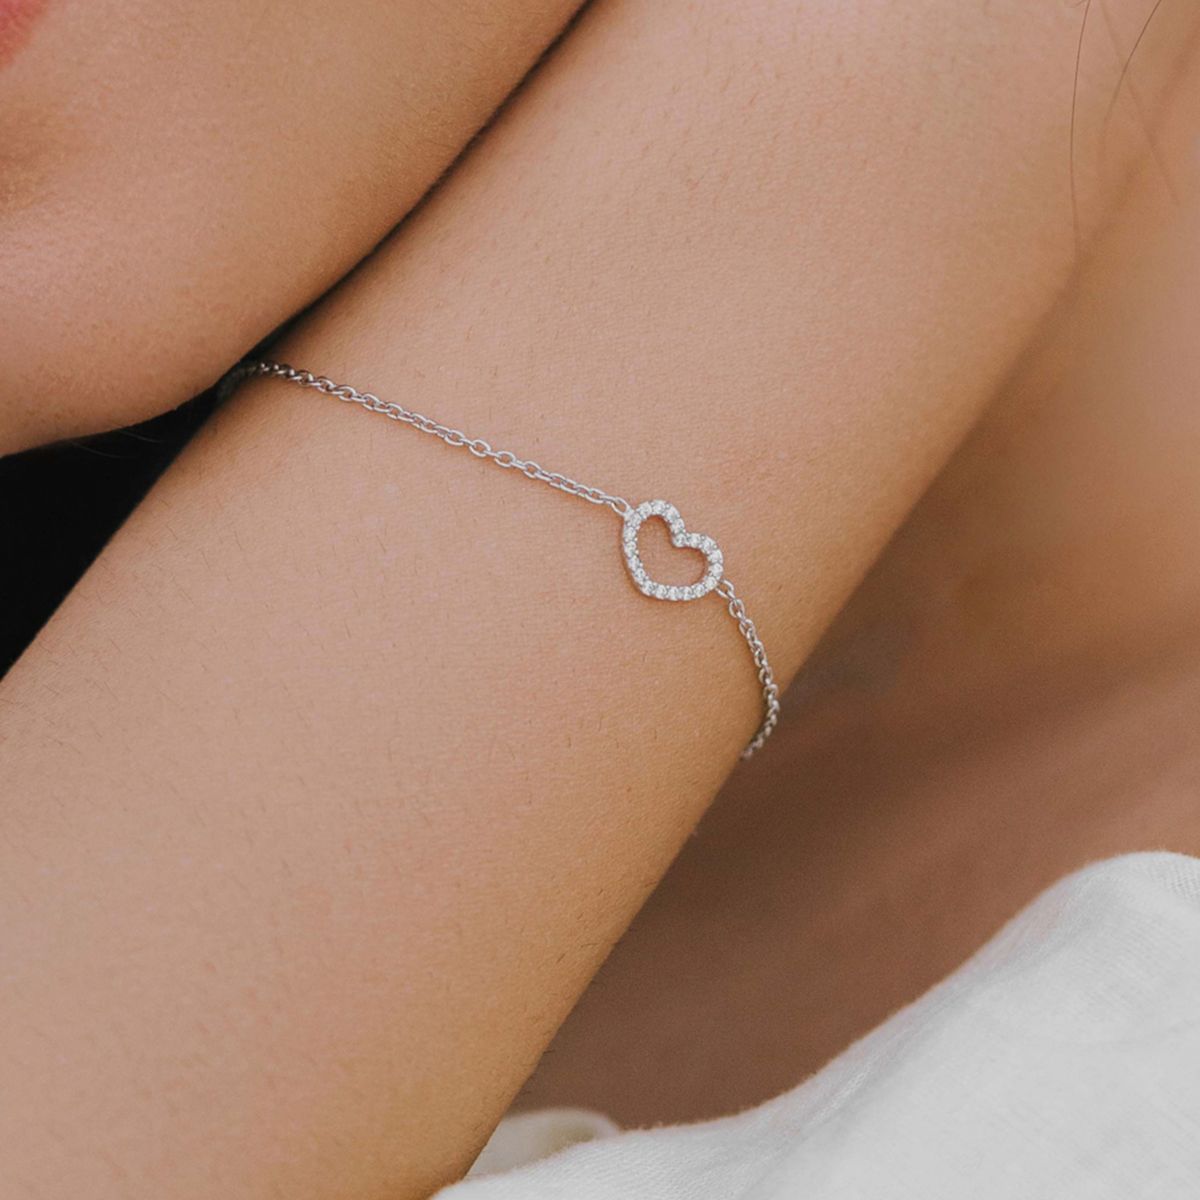 Discover more than 82 heart bracelet latest